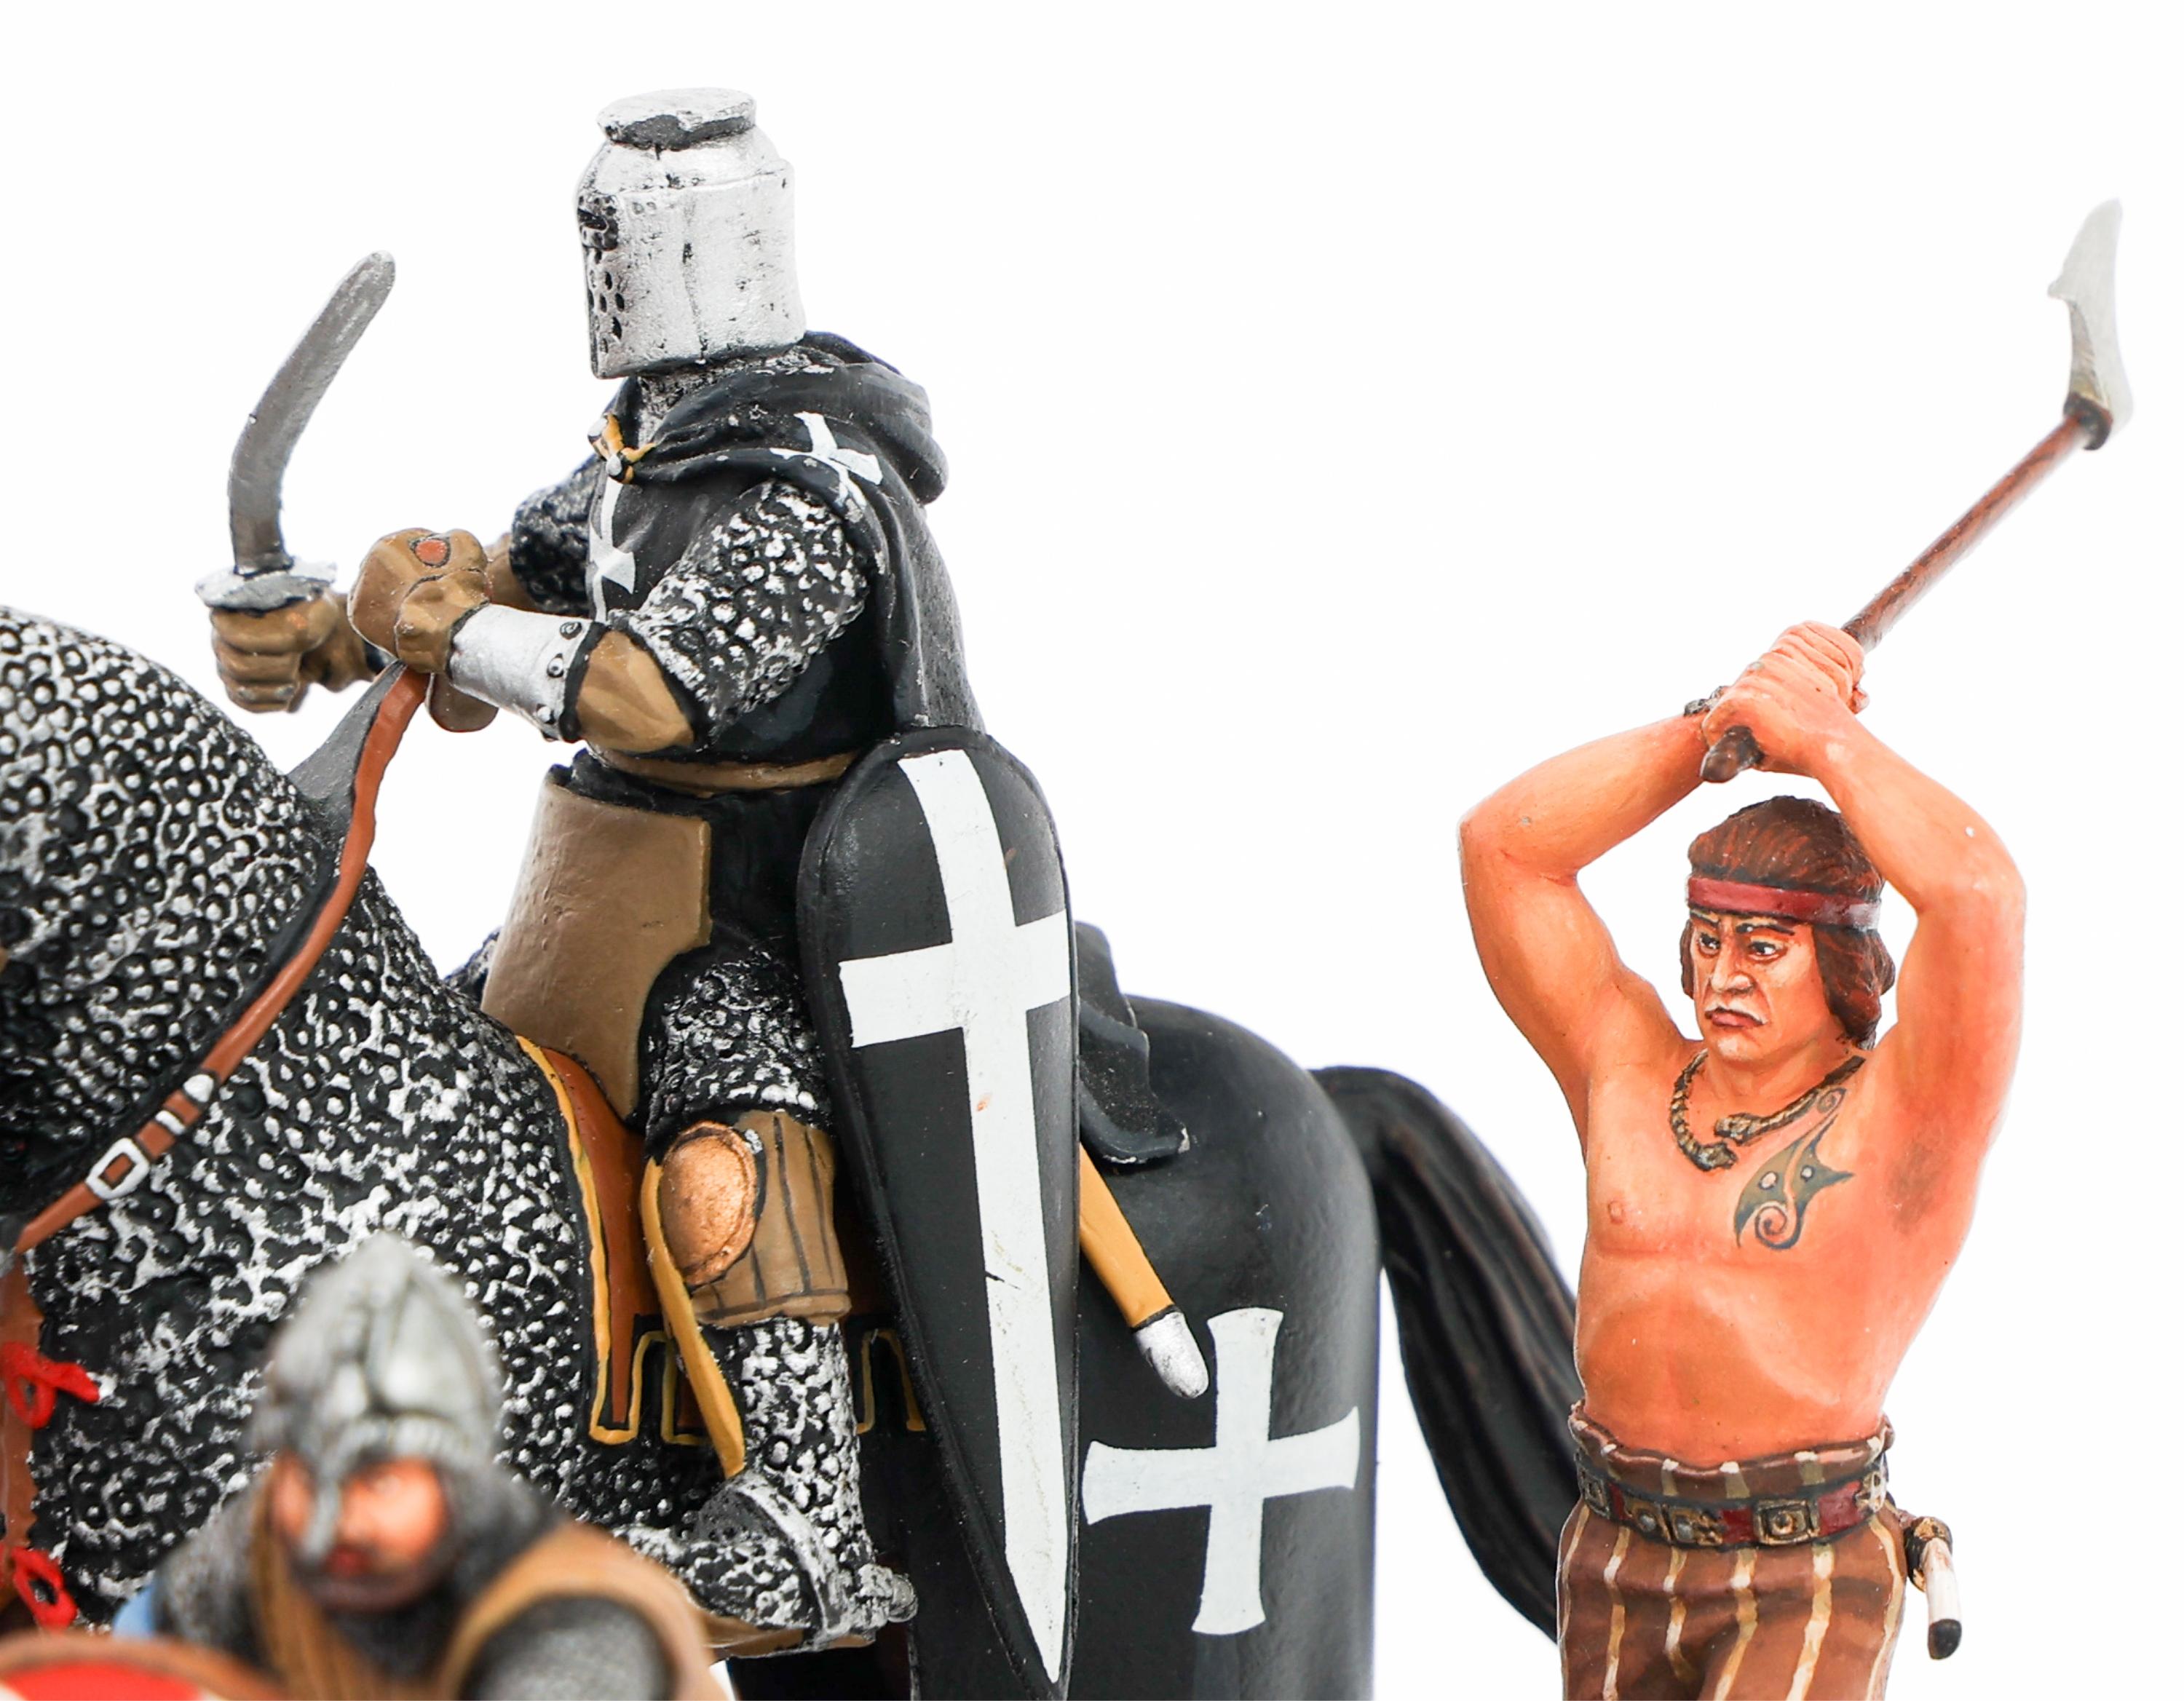 WORLD MILITARY THEMED TOYS & FIGURINES